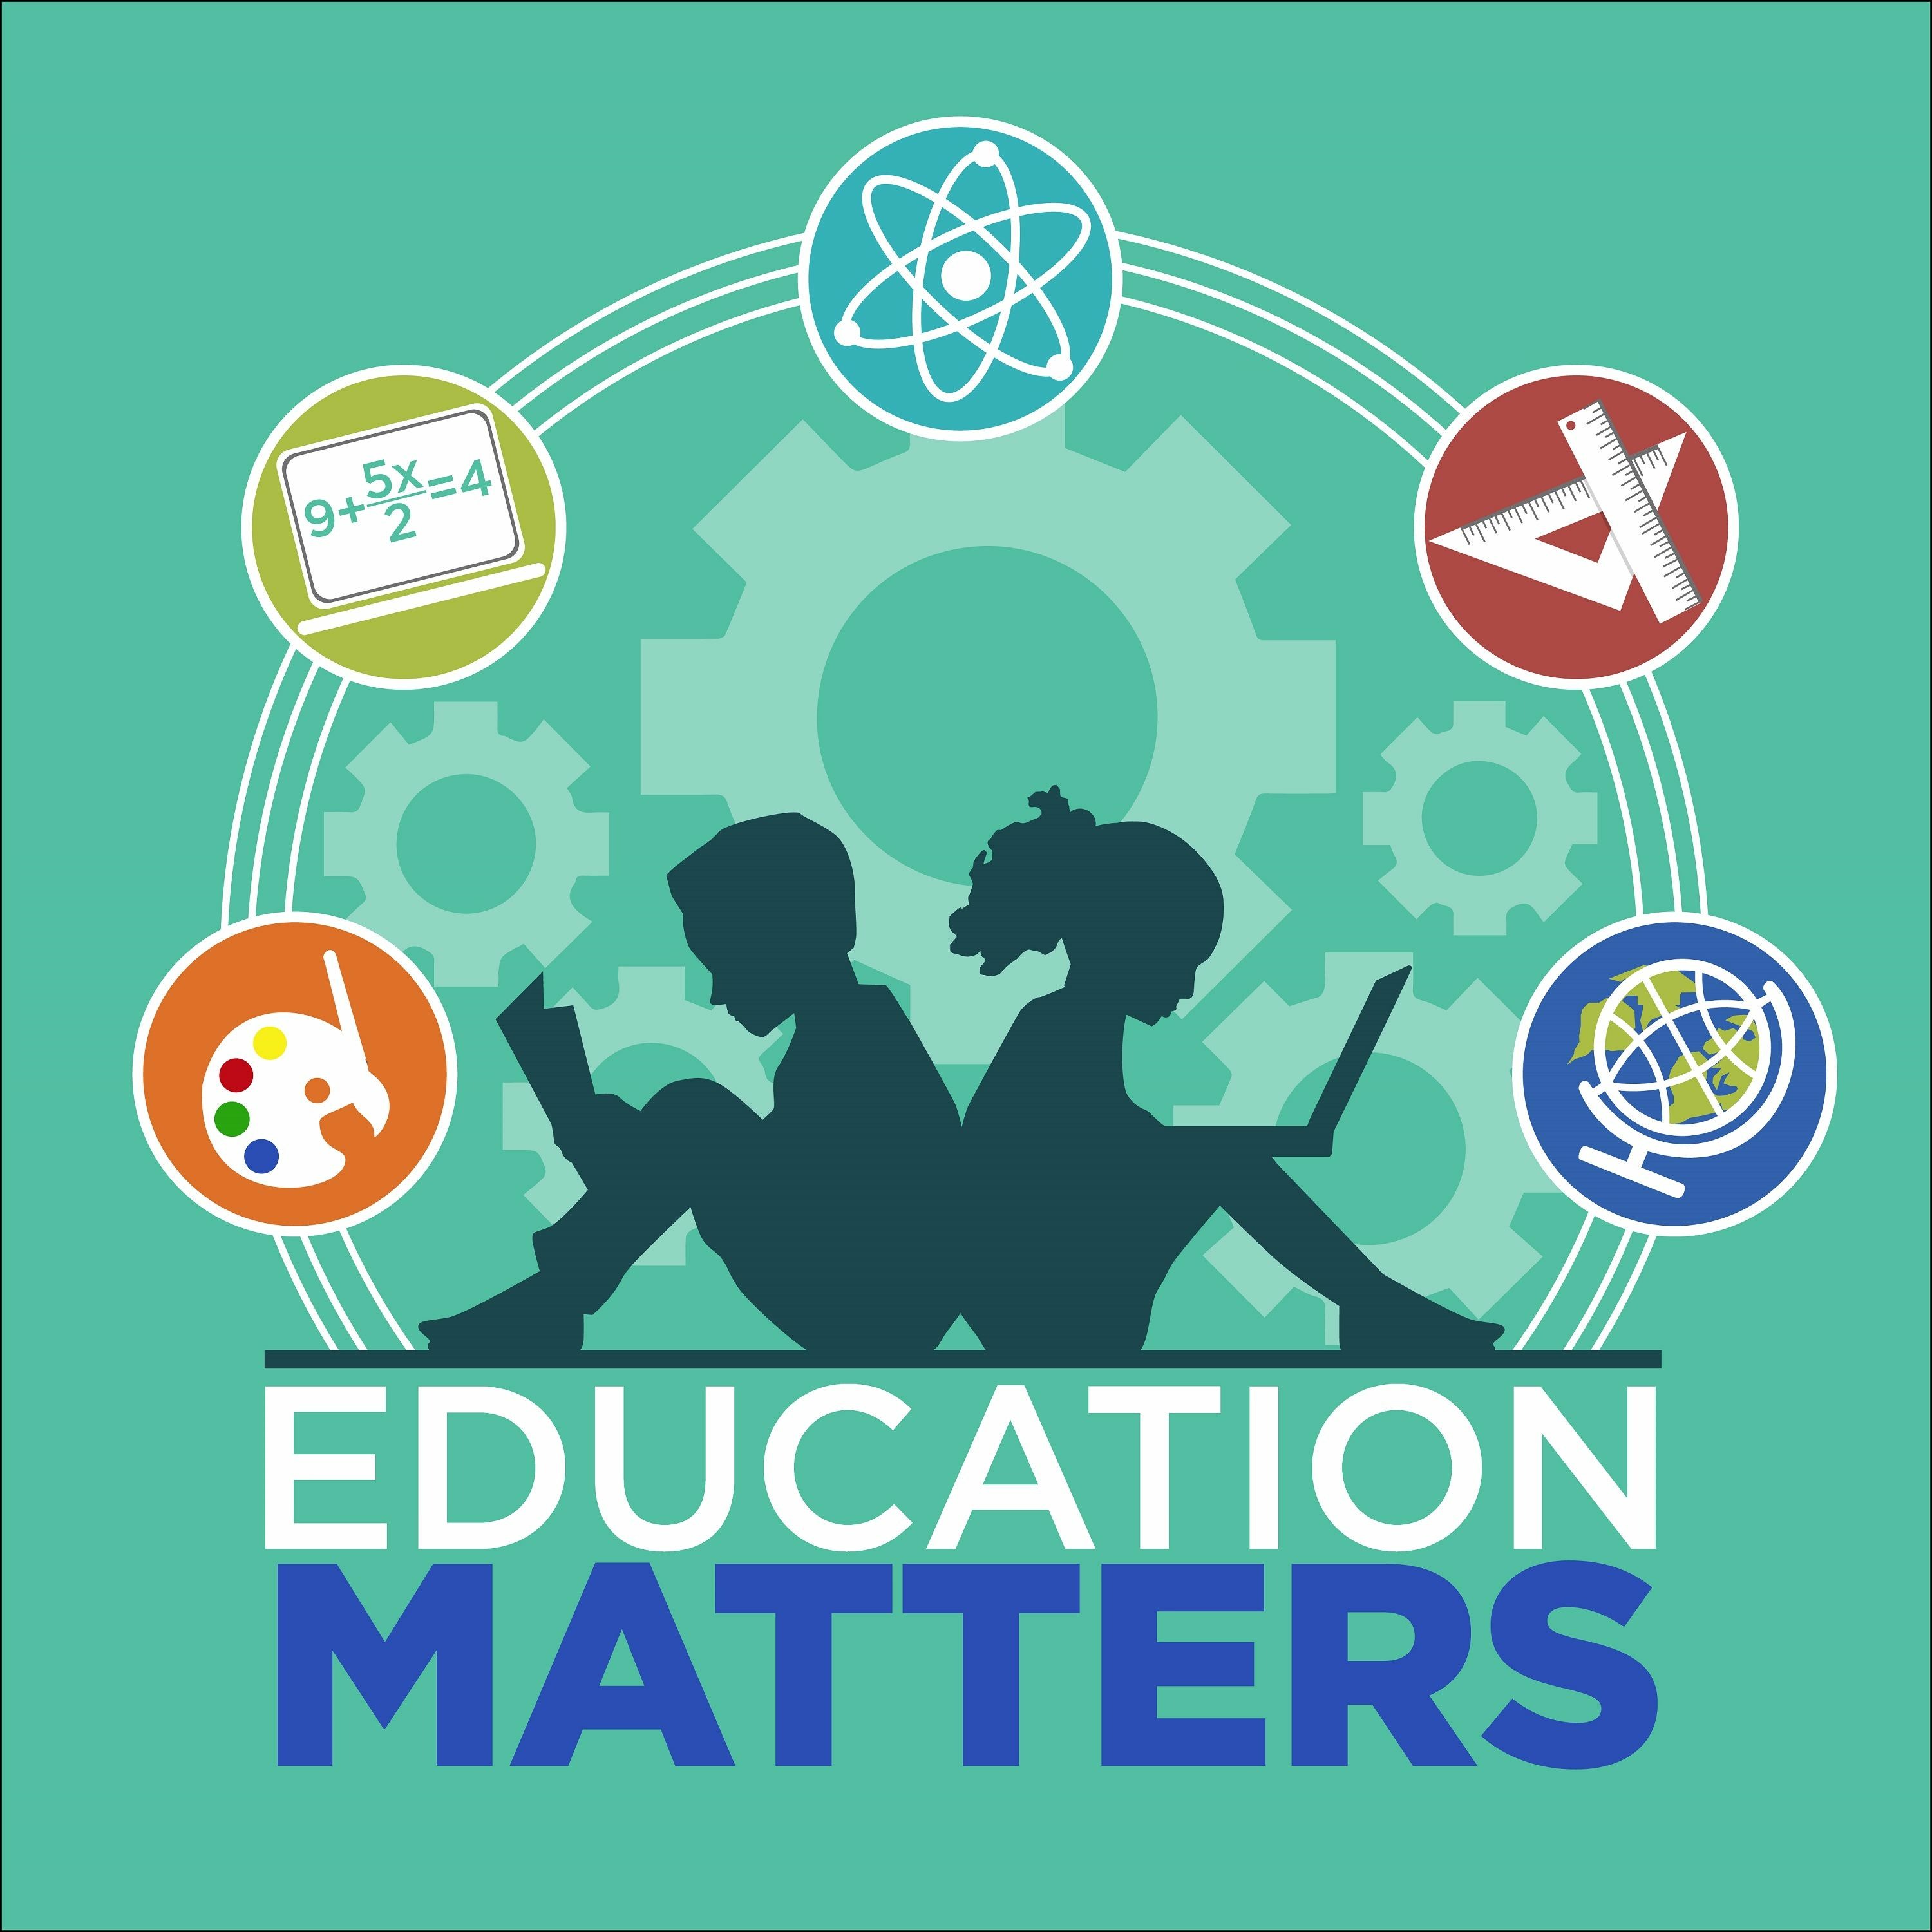 Episode 23 - Private School Vouchers: A National Perspective